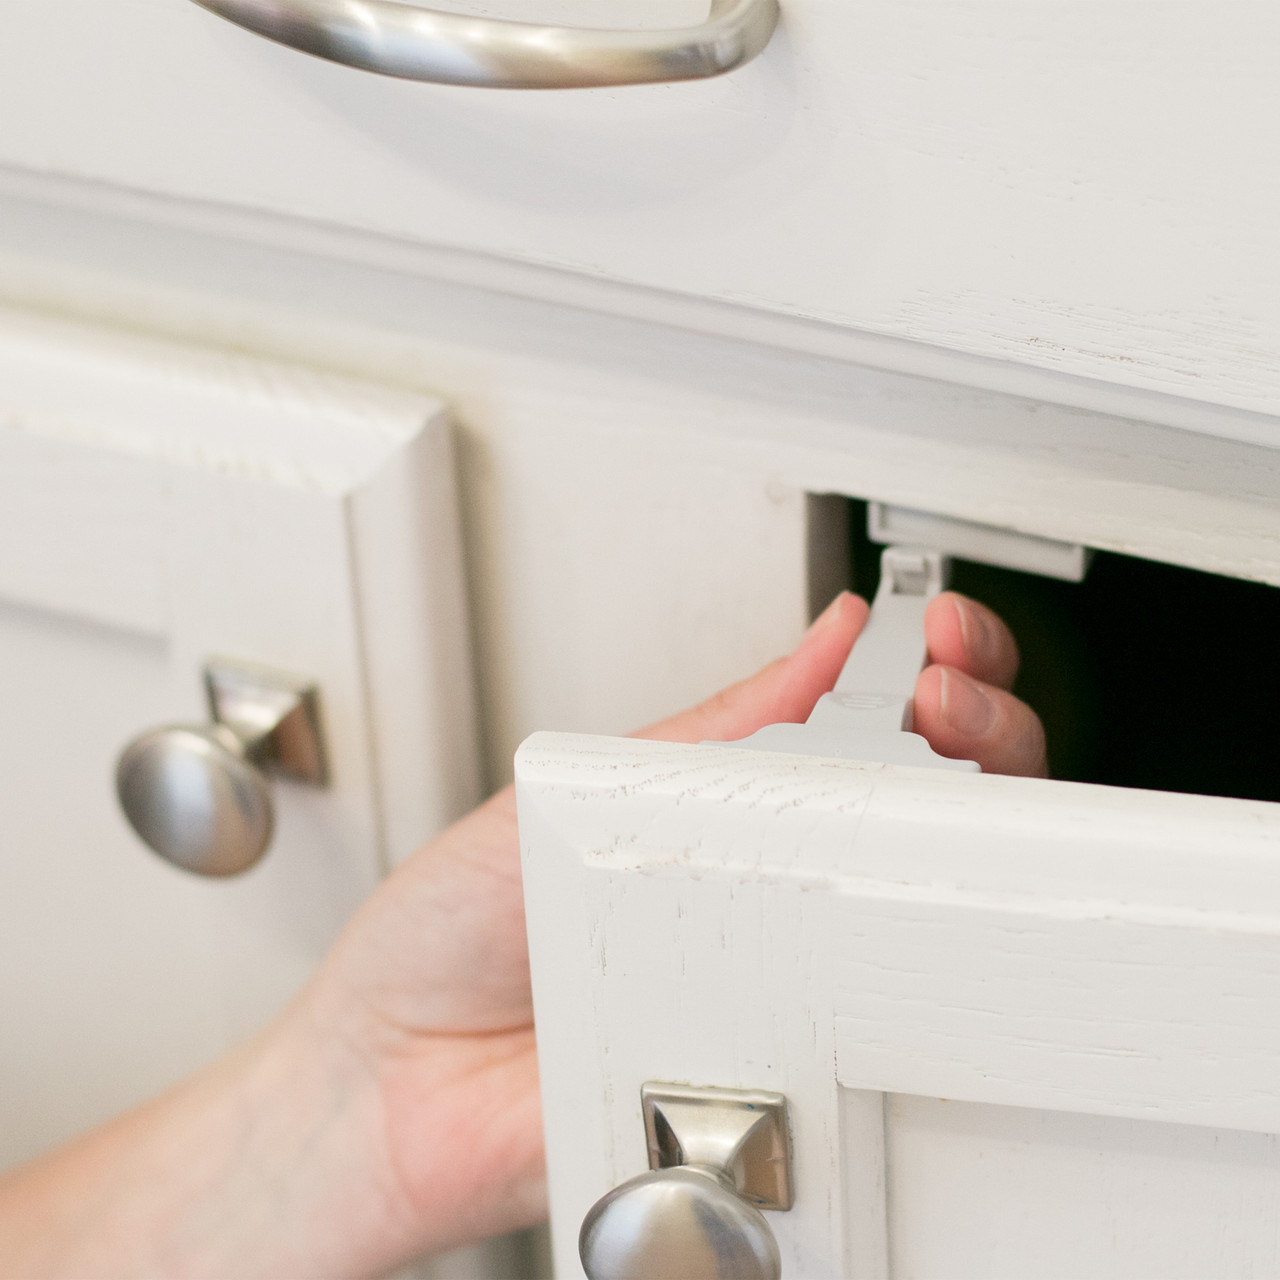 Adhesive Cabinet & Drawer Latches: Installation Guide